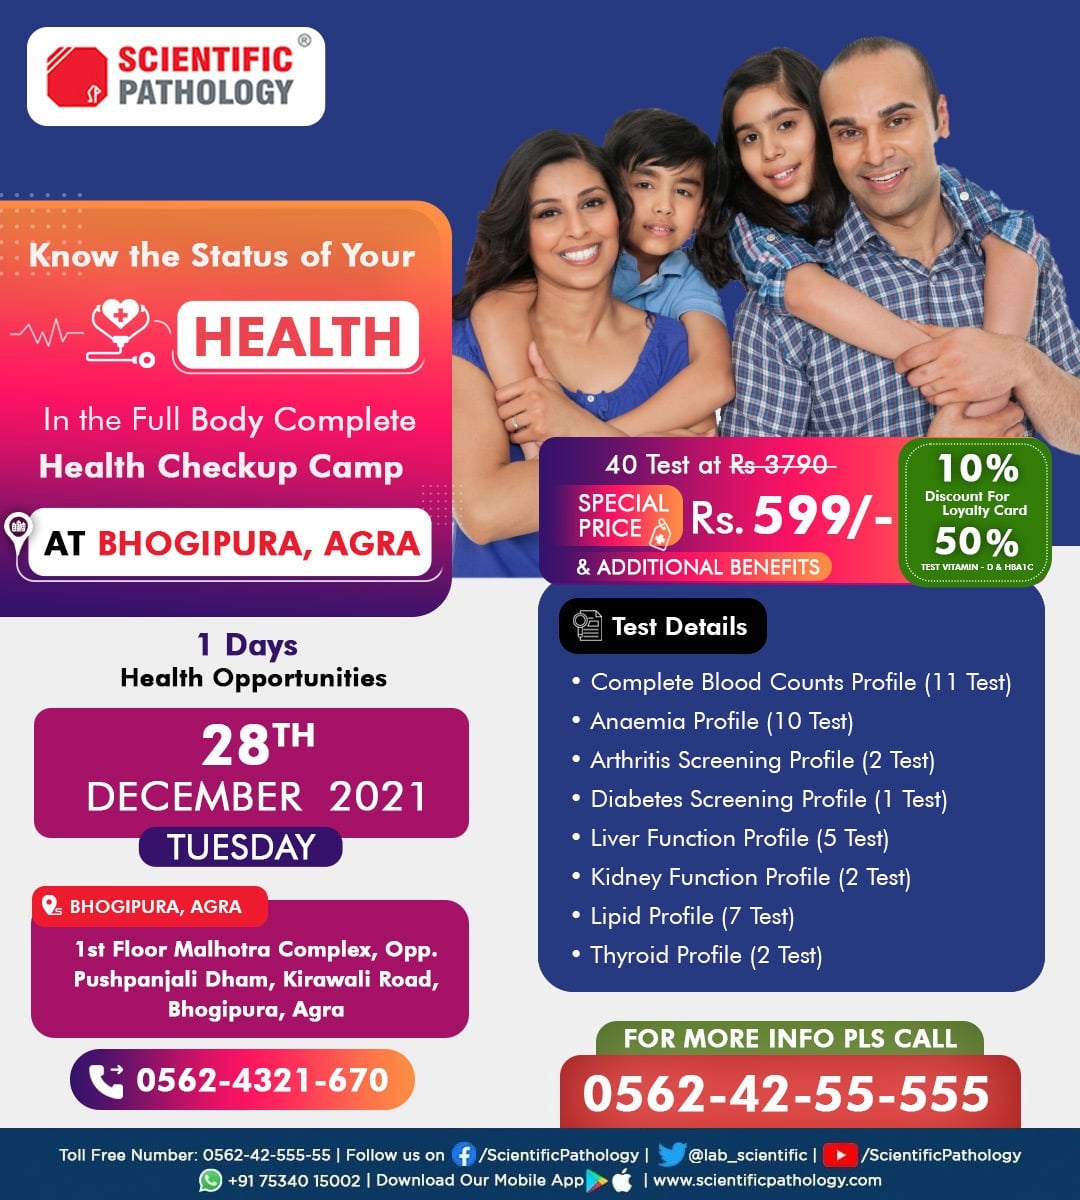 Get your full body health check up. Come and visit our camp in Agra. Stay tuned for more such offers.